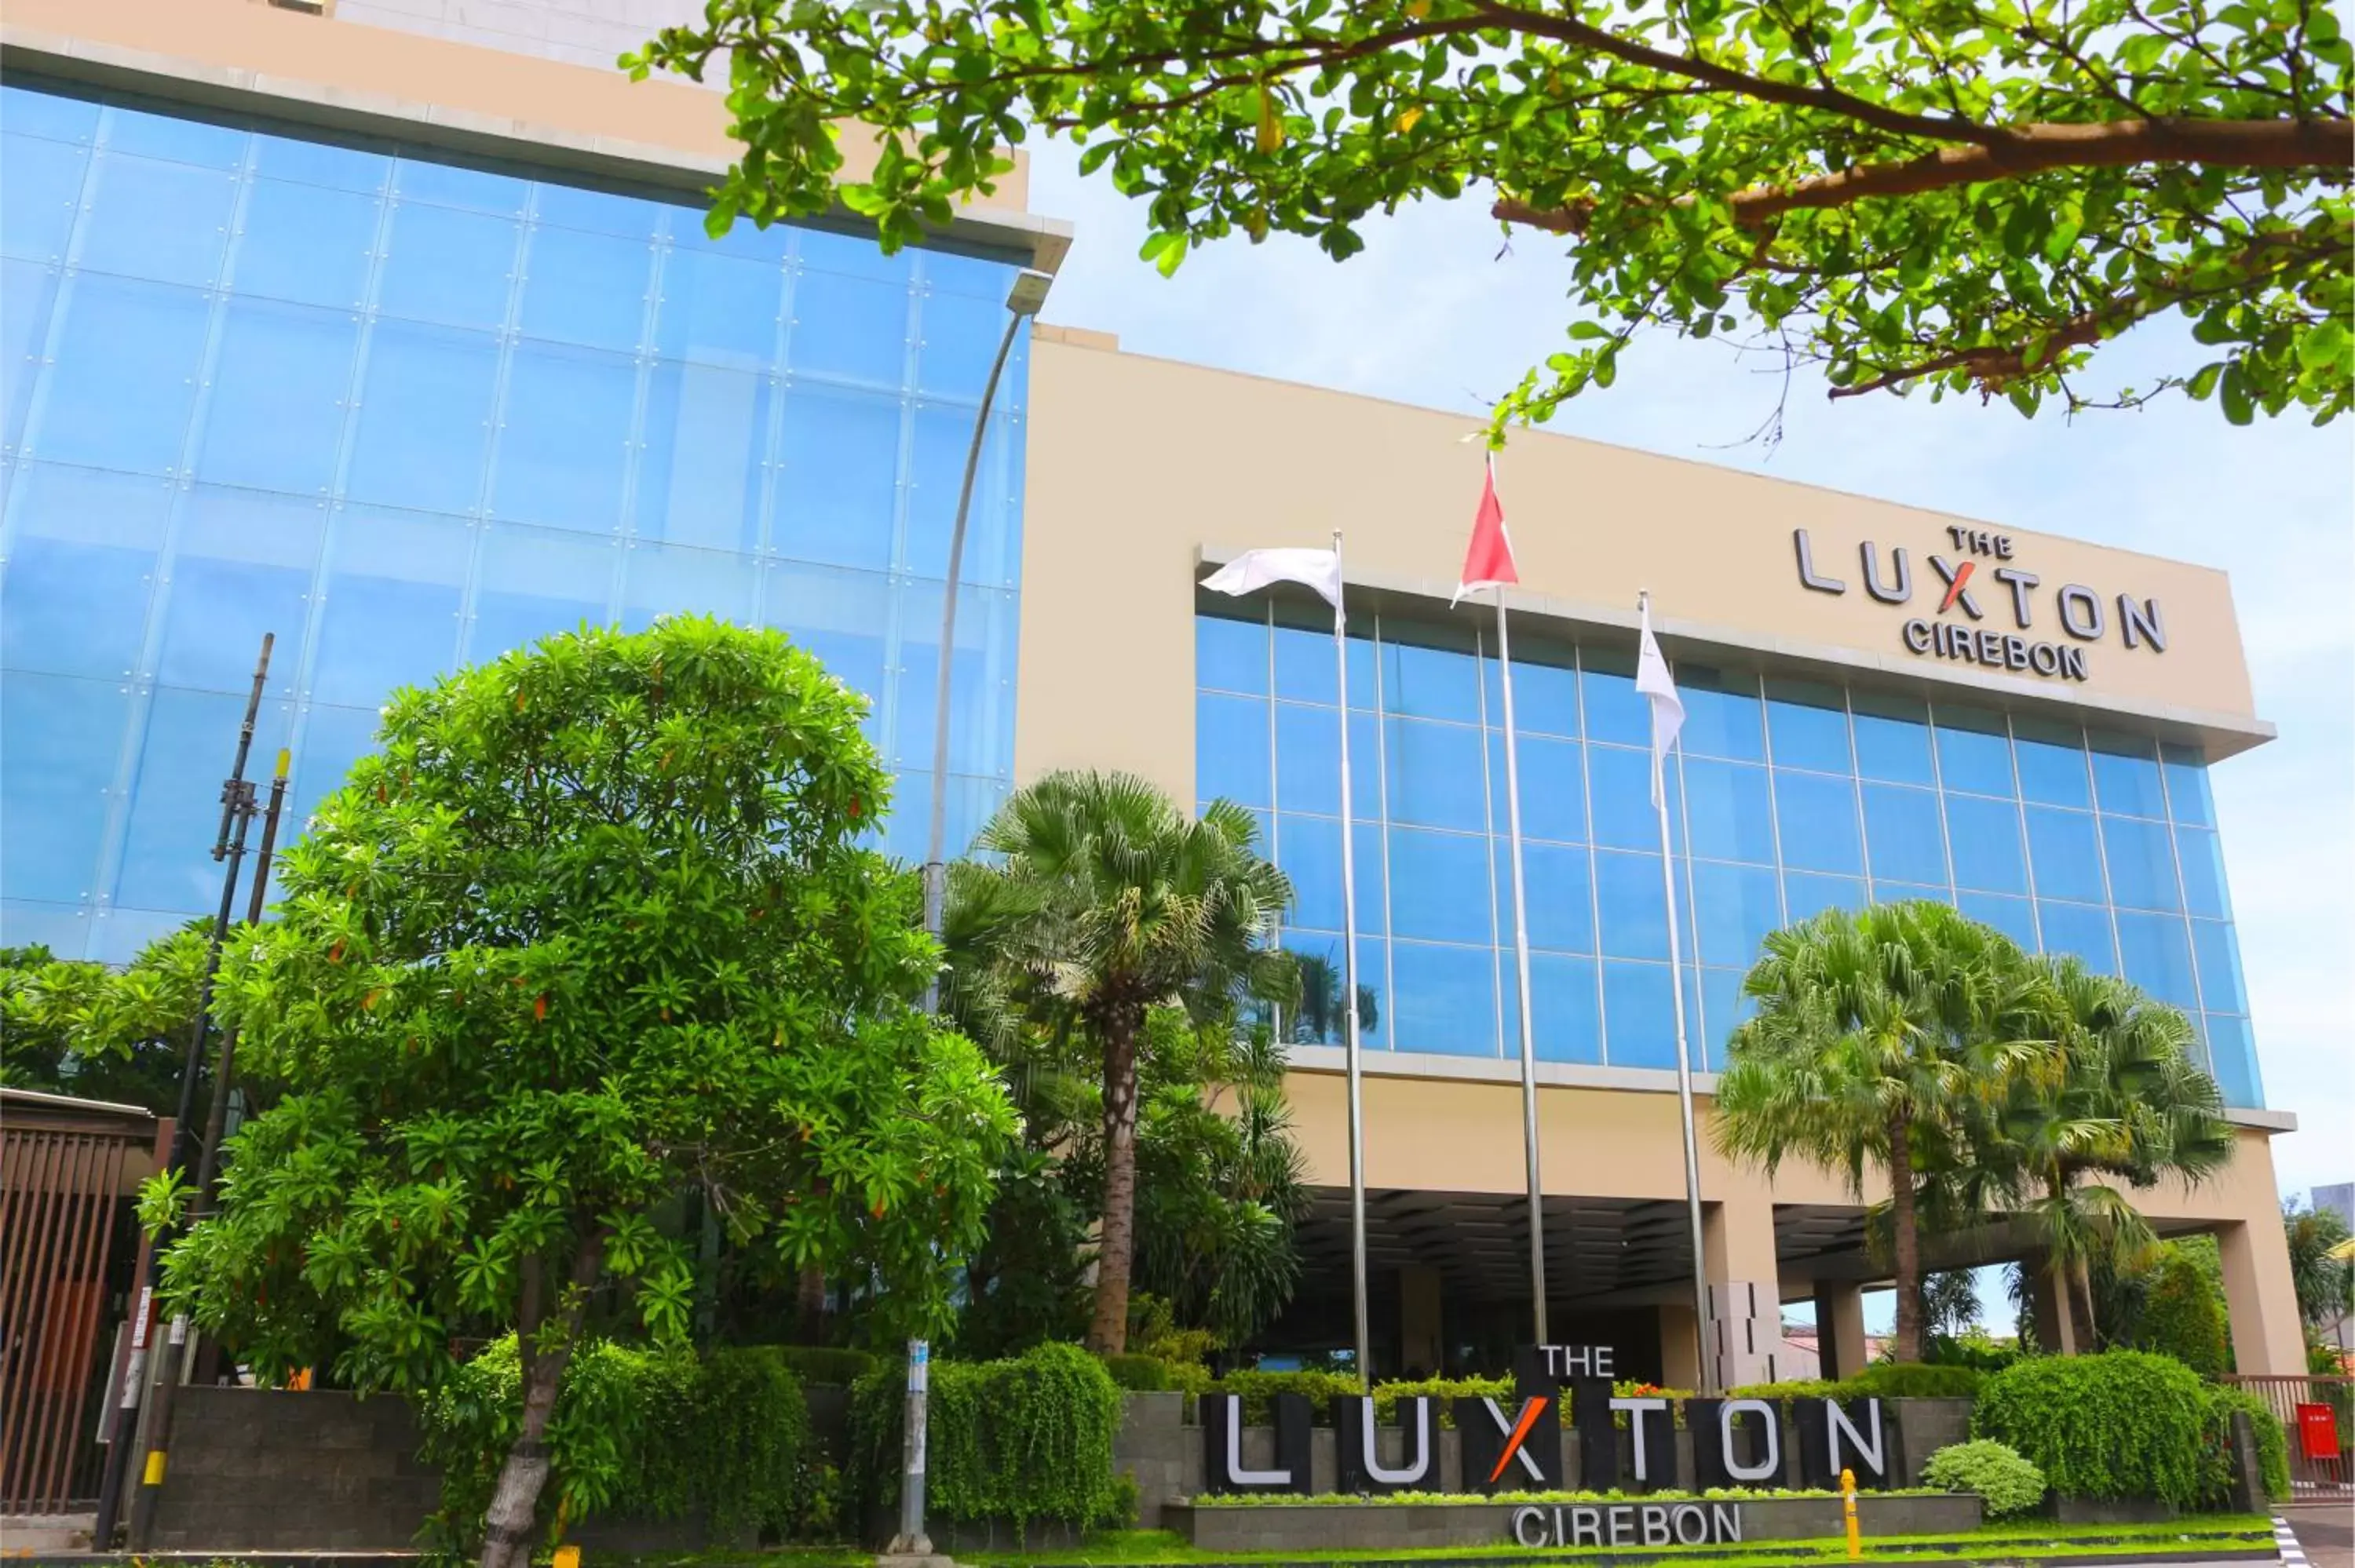 Property logo or sign, Property Building in The Luxton Cirebon Hotel and Convention